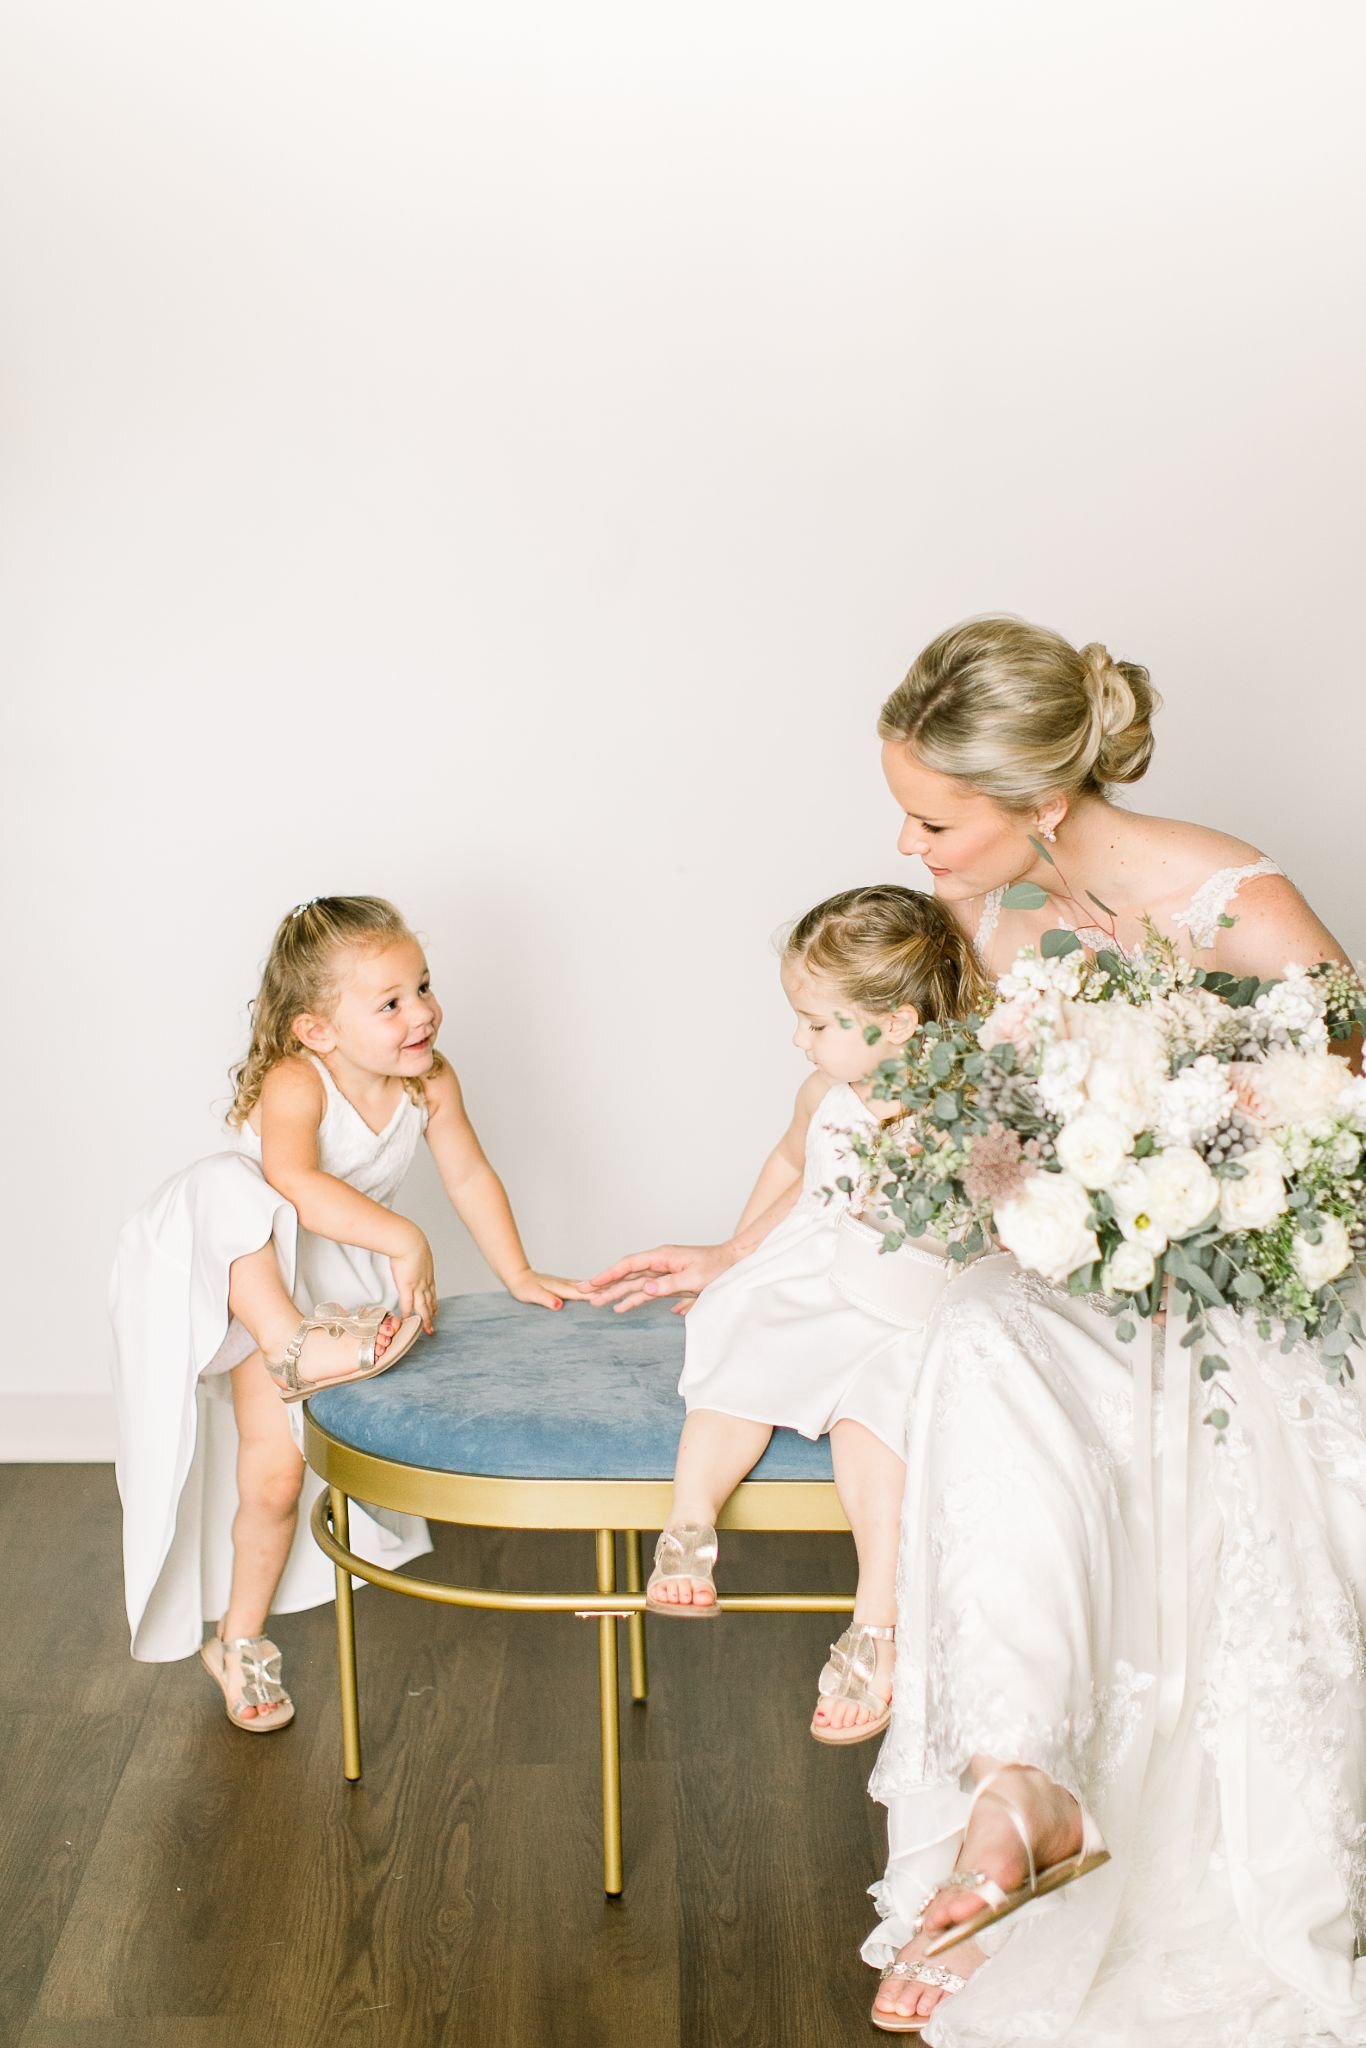 Candid wedding photograph of a bride and two flower girls